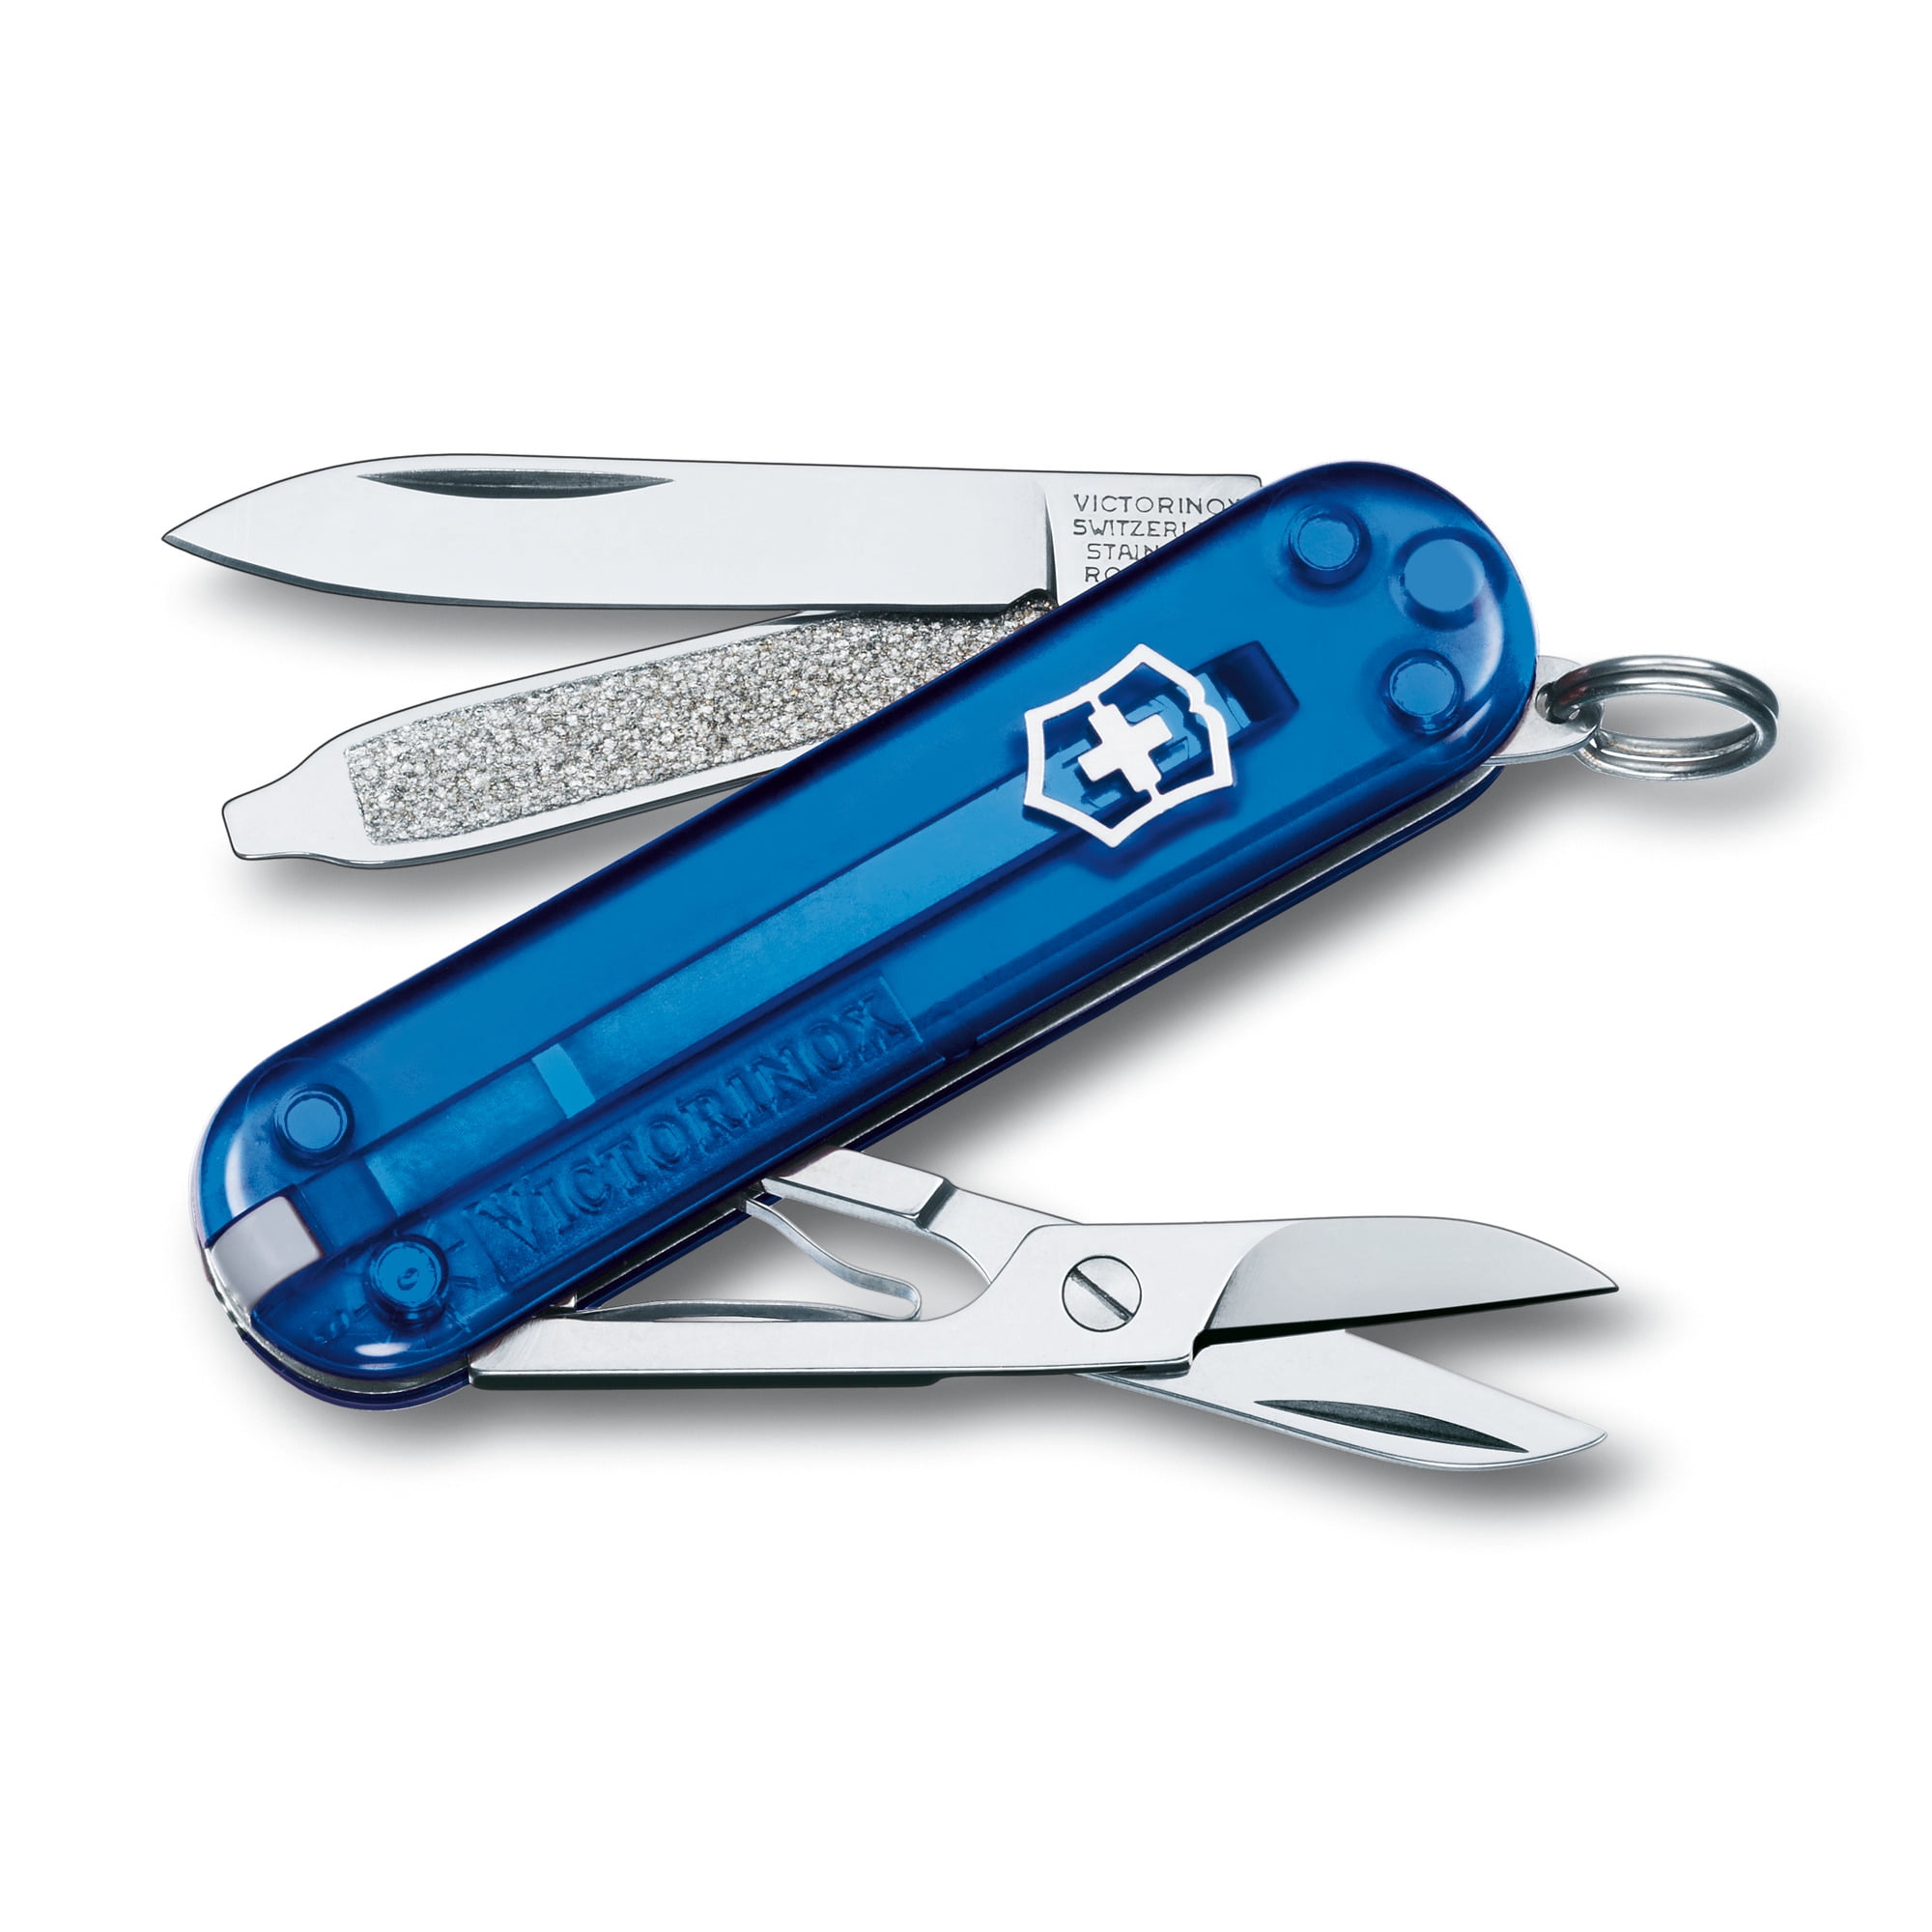  Victorinox Classic SD 7 Function Black Cat Limited Edition  Pocket Knife : Sports & Outdoors